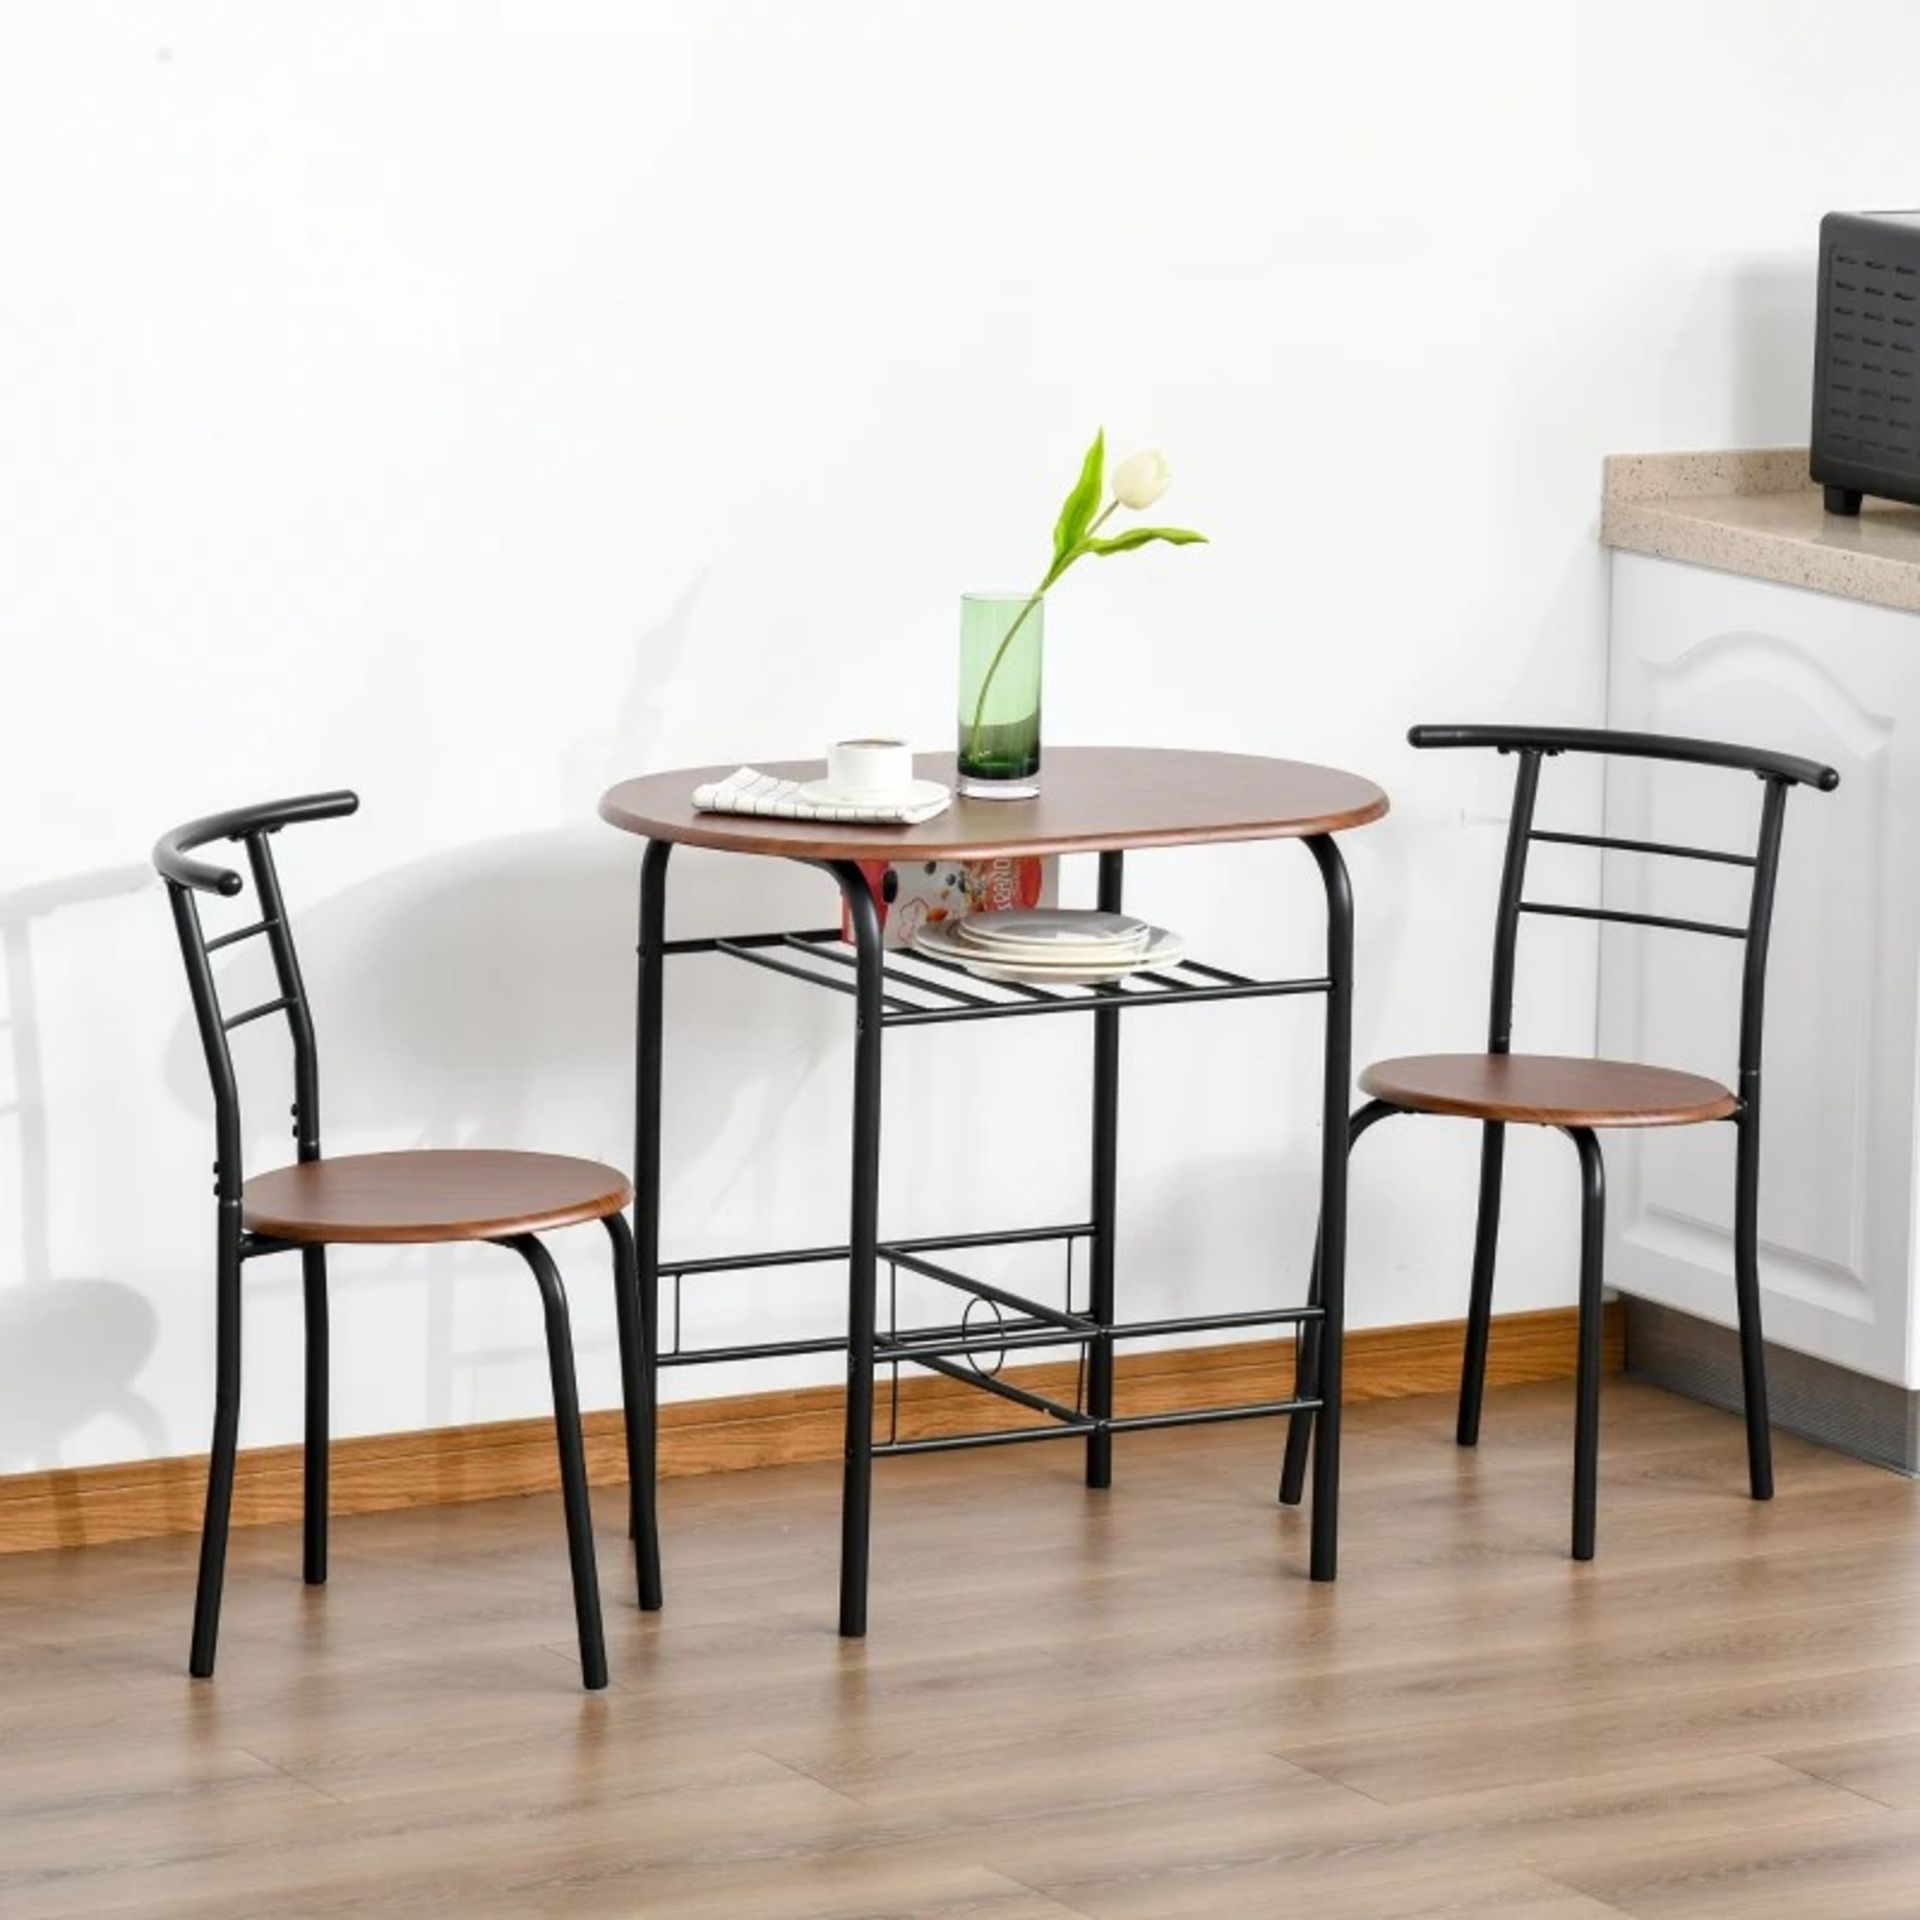 RRP £86.99 - 2-Seater Bar Stool and Table Set w/ Bottle Storage Shelf Wood Tone - DIMENSIONS: Table: